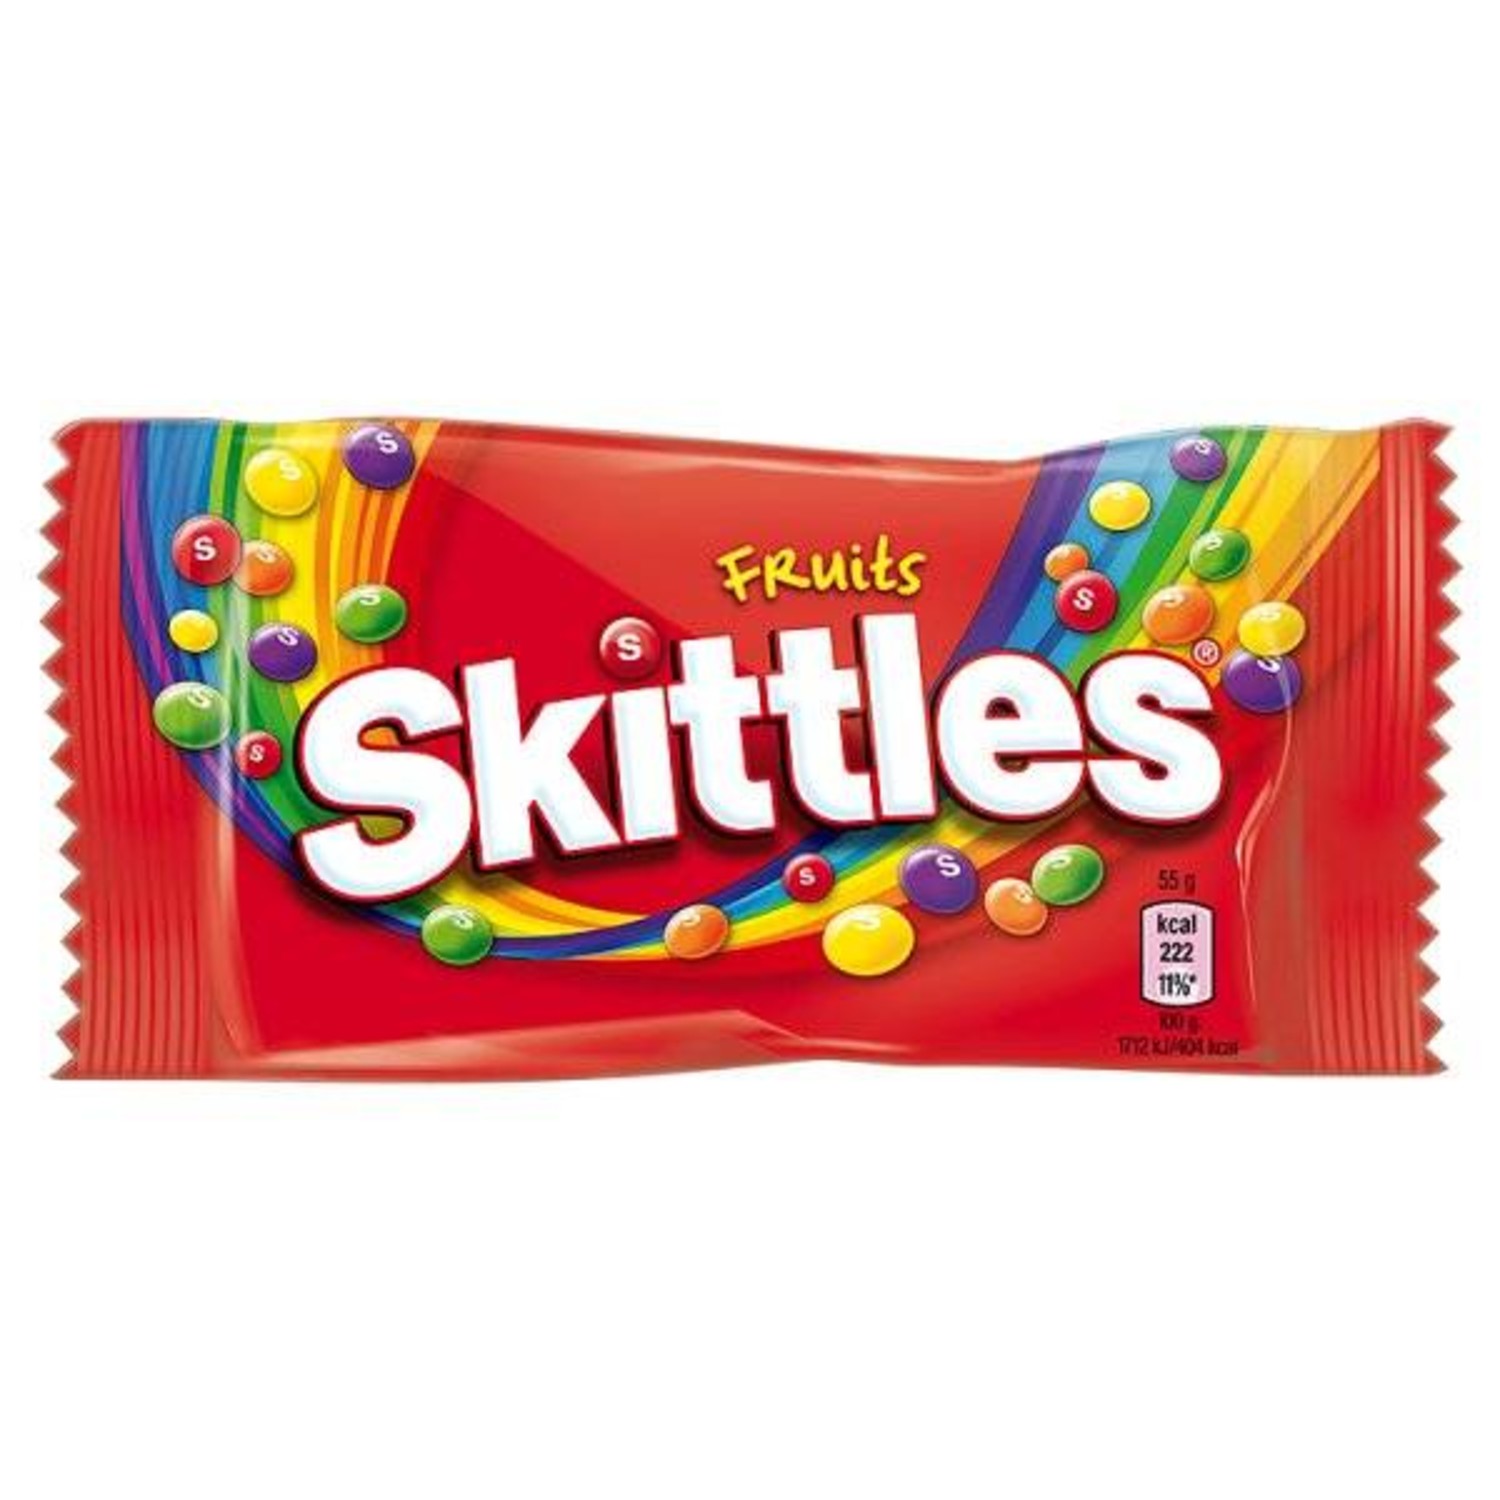 Skittles Fruits (174 g) - Five Star Trading Holland